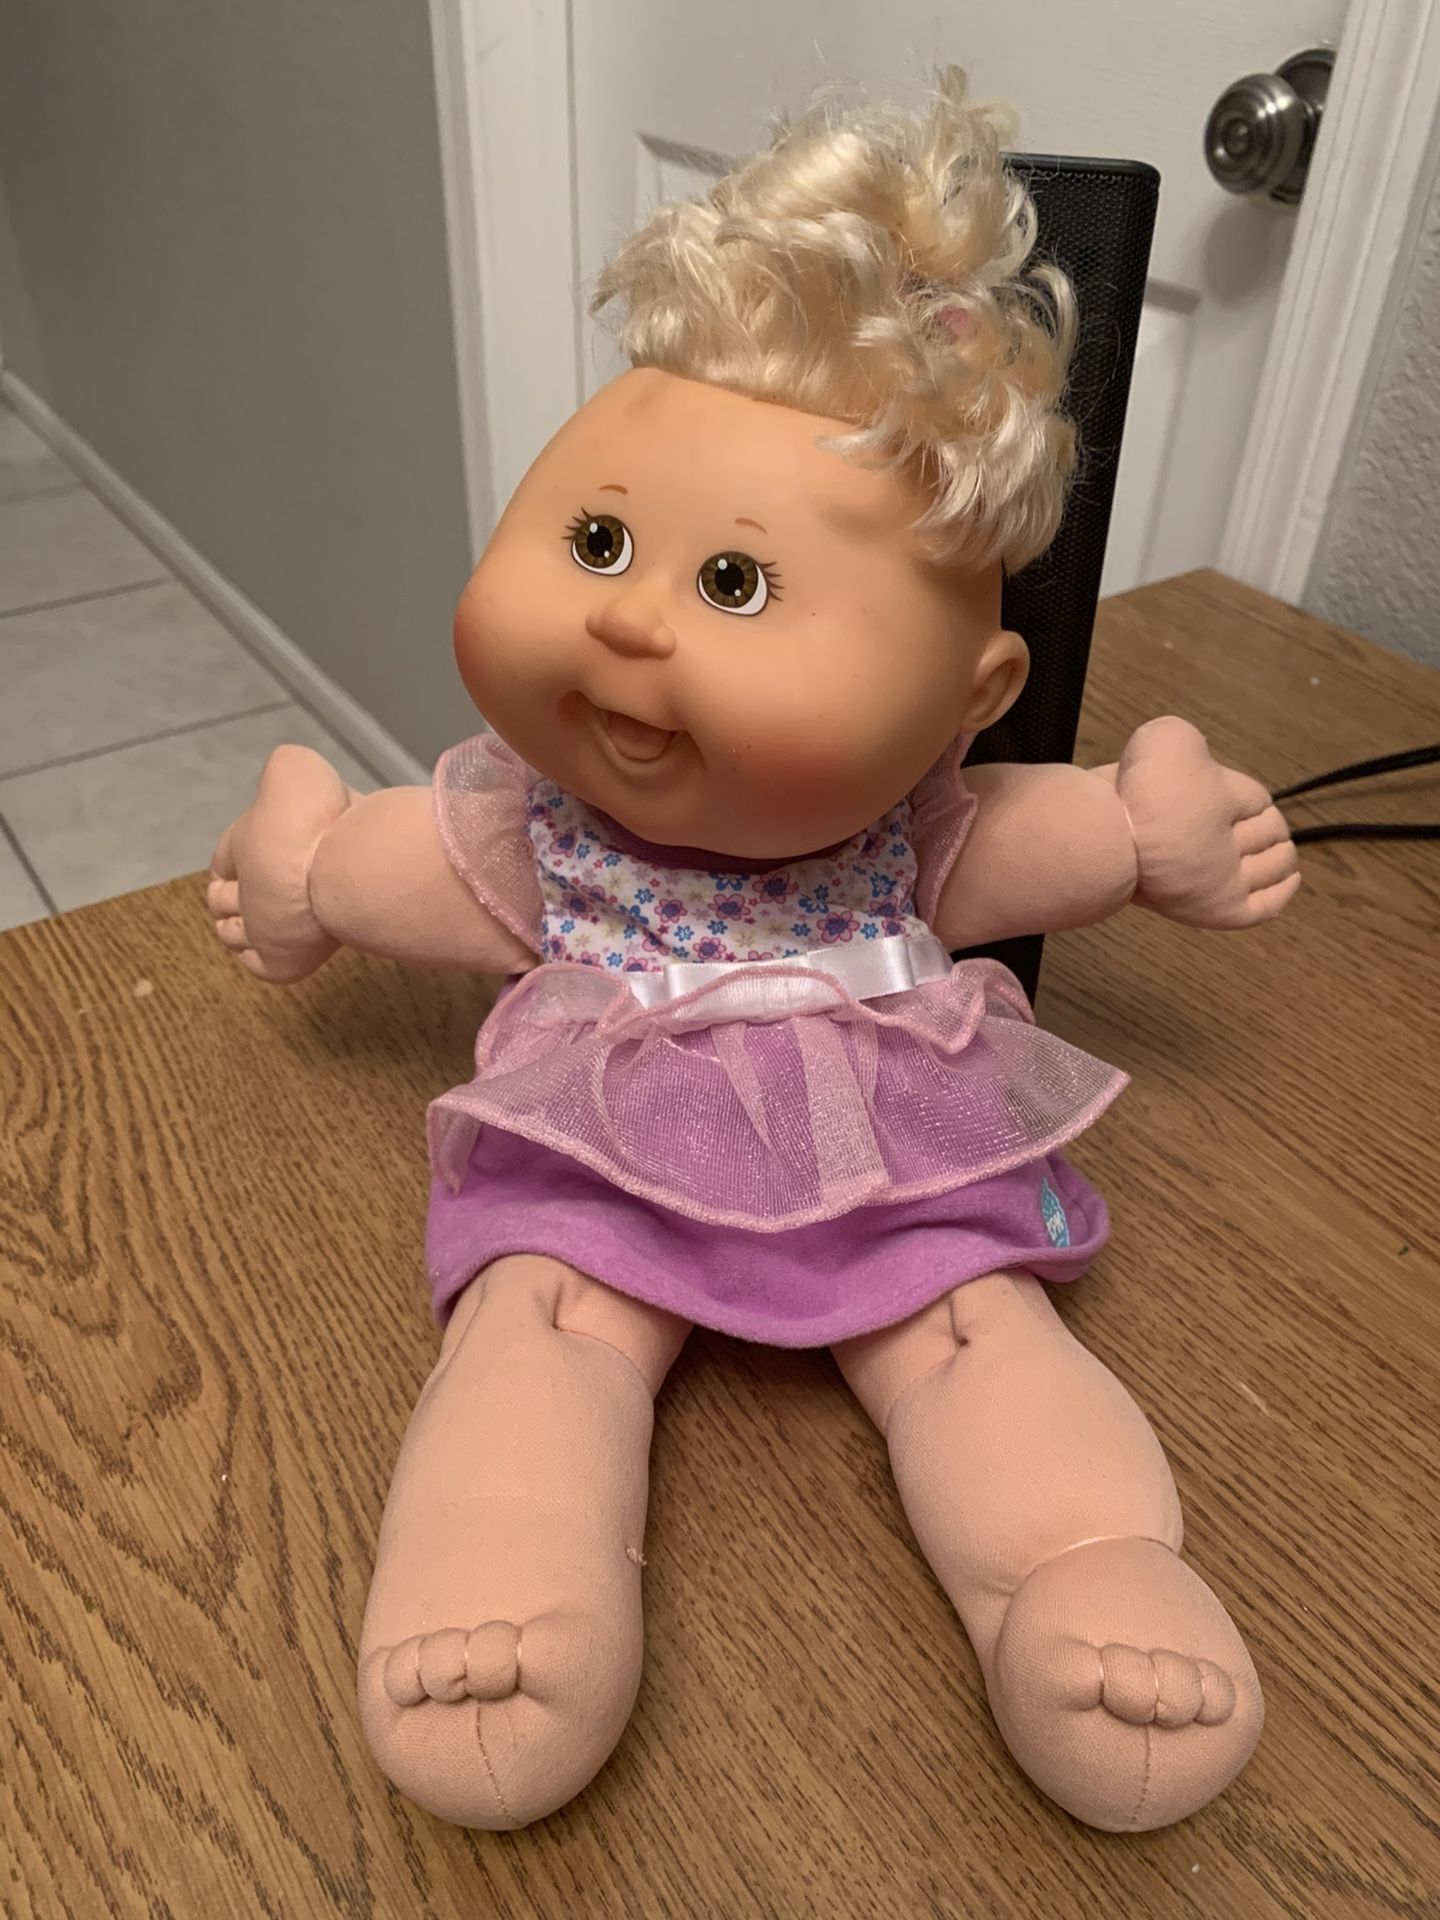 2007 14" Cabbage Patch Kids Blonde Girl Doll Corn Silk Hair ,Tongue Out Purple